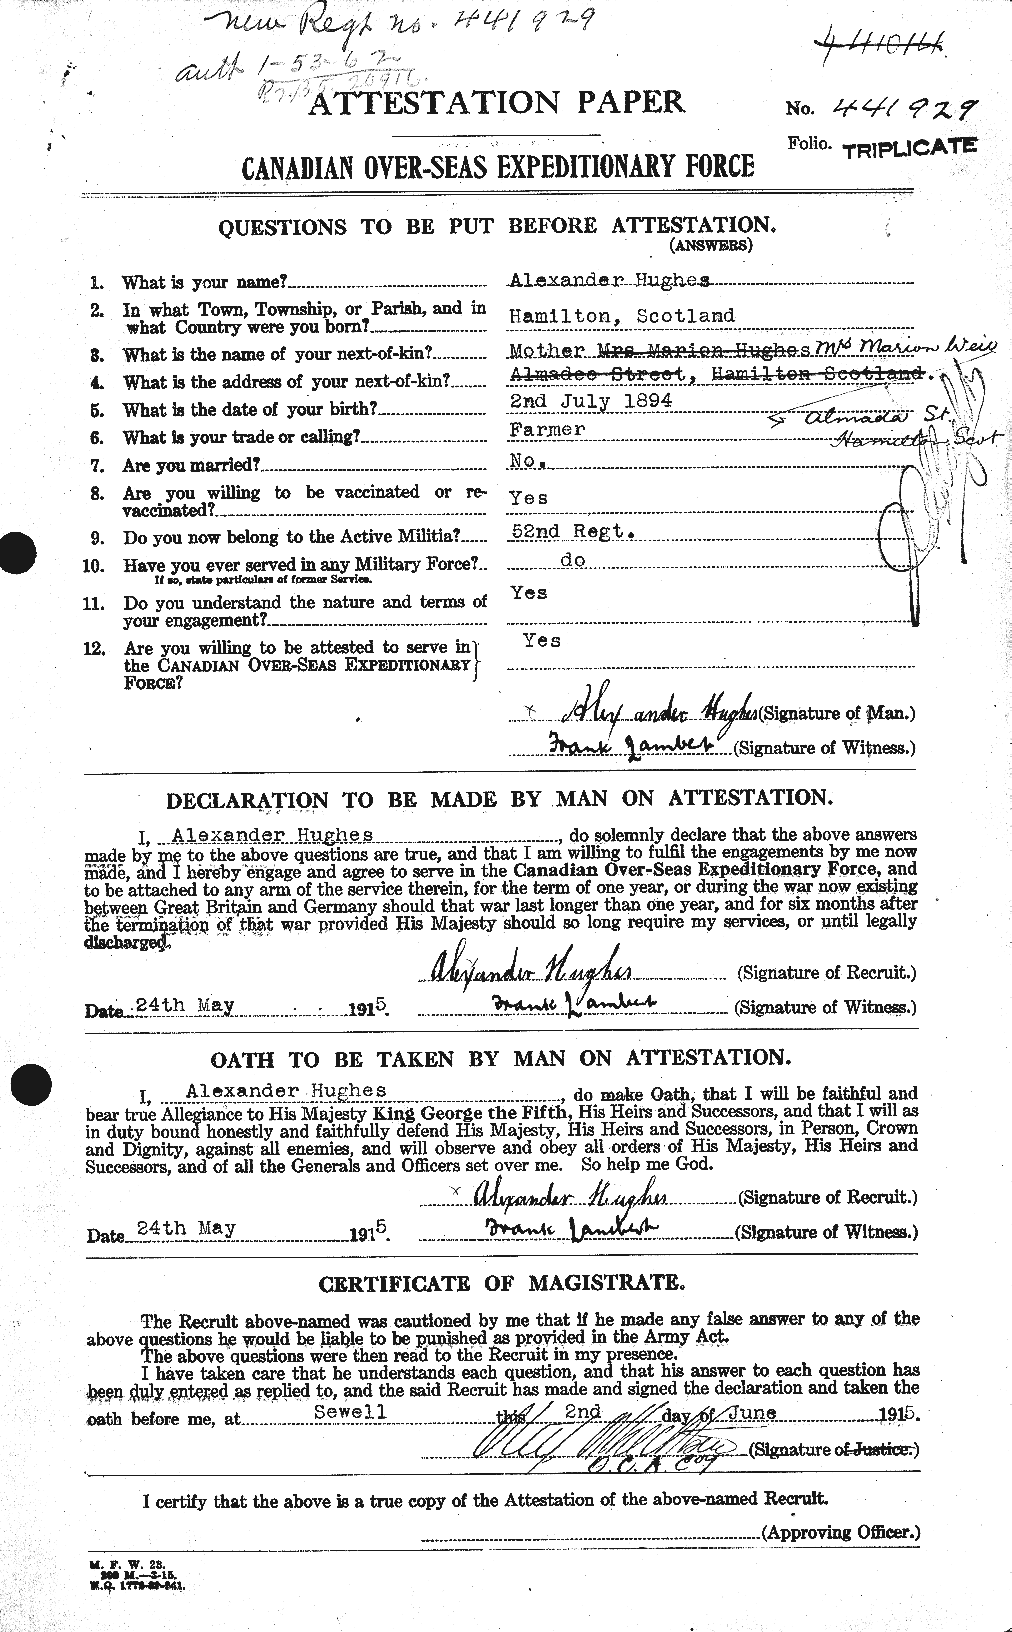 Personnel Records of the First World War - CEF 402528a